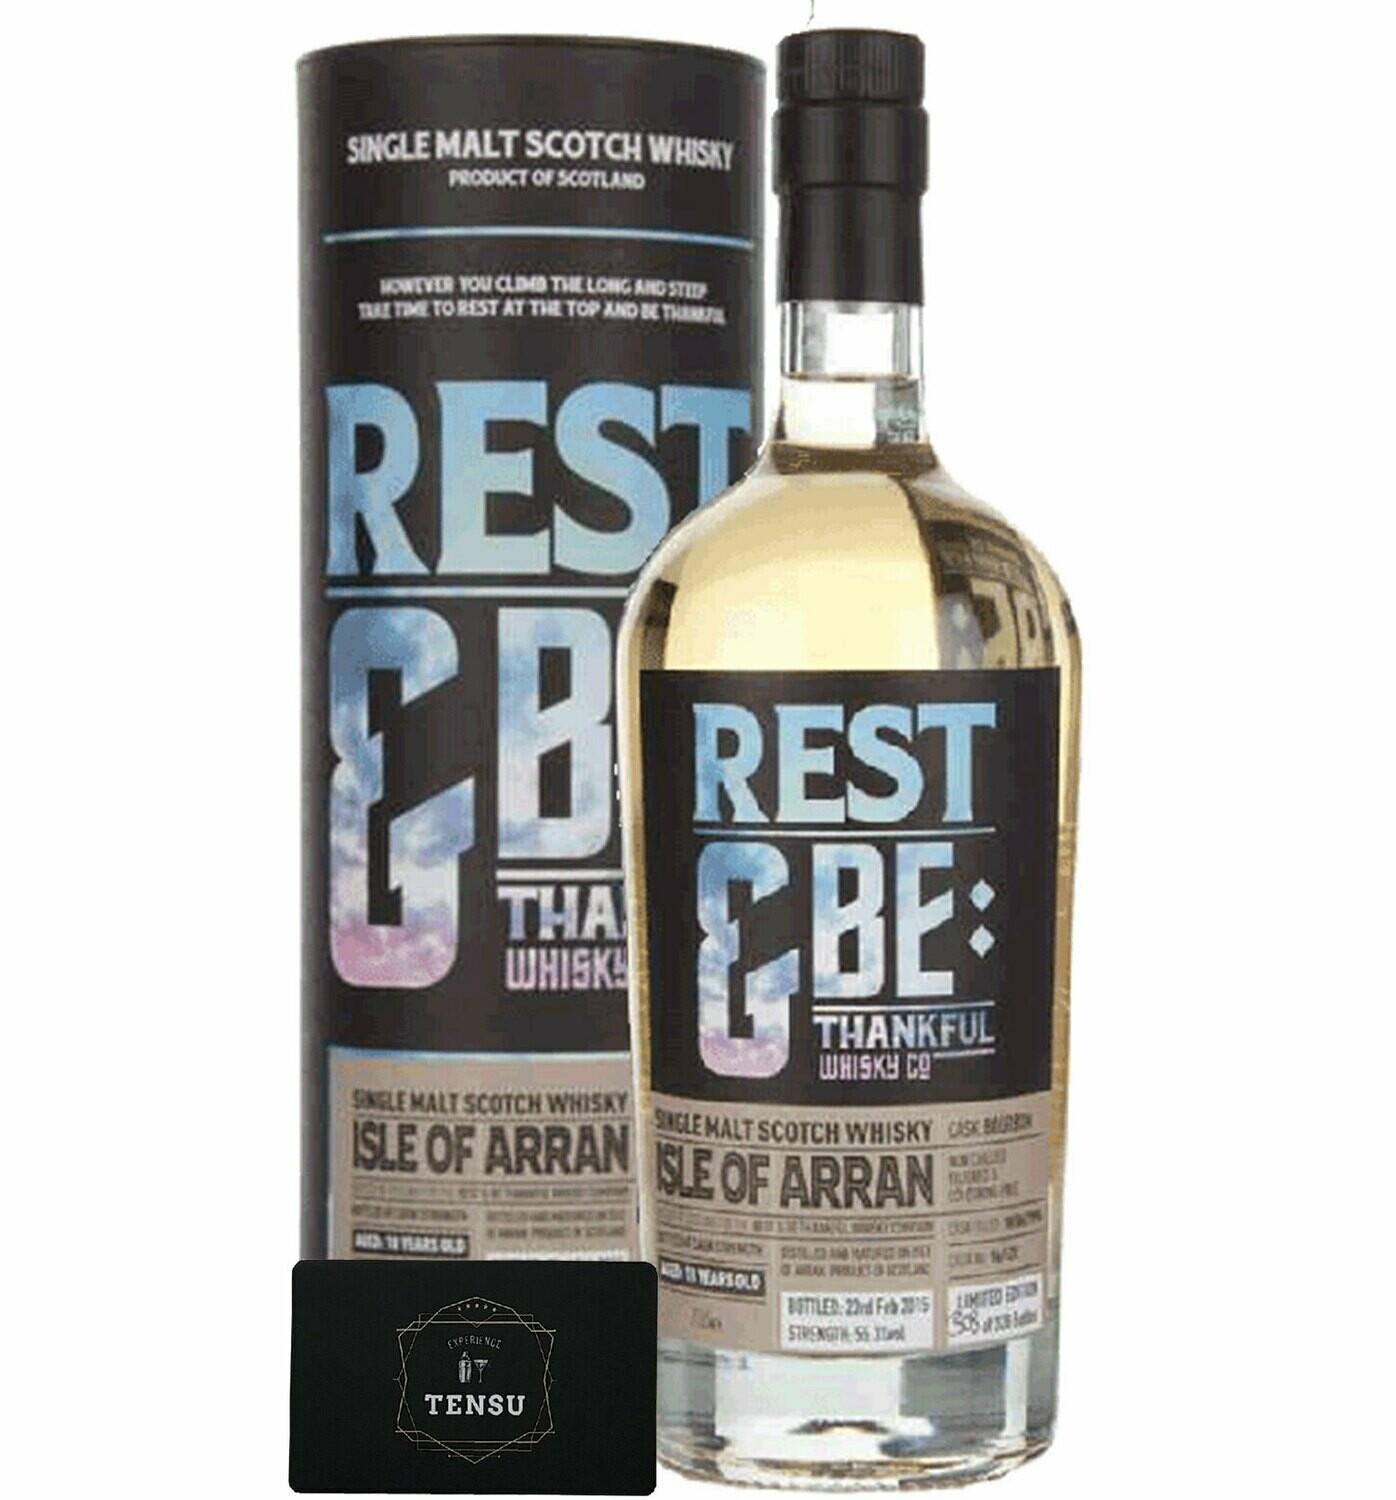 Arran 18 Years Old (1996-2015) "Rest & Be Thankfull" [SAMPLE 2CL]